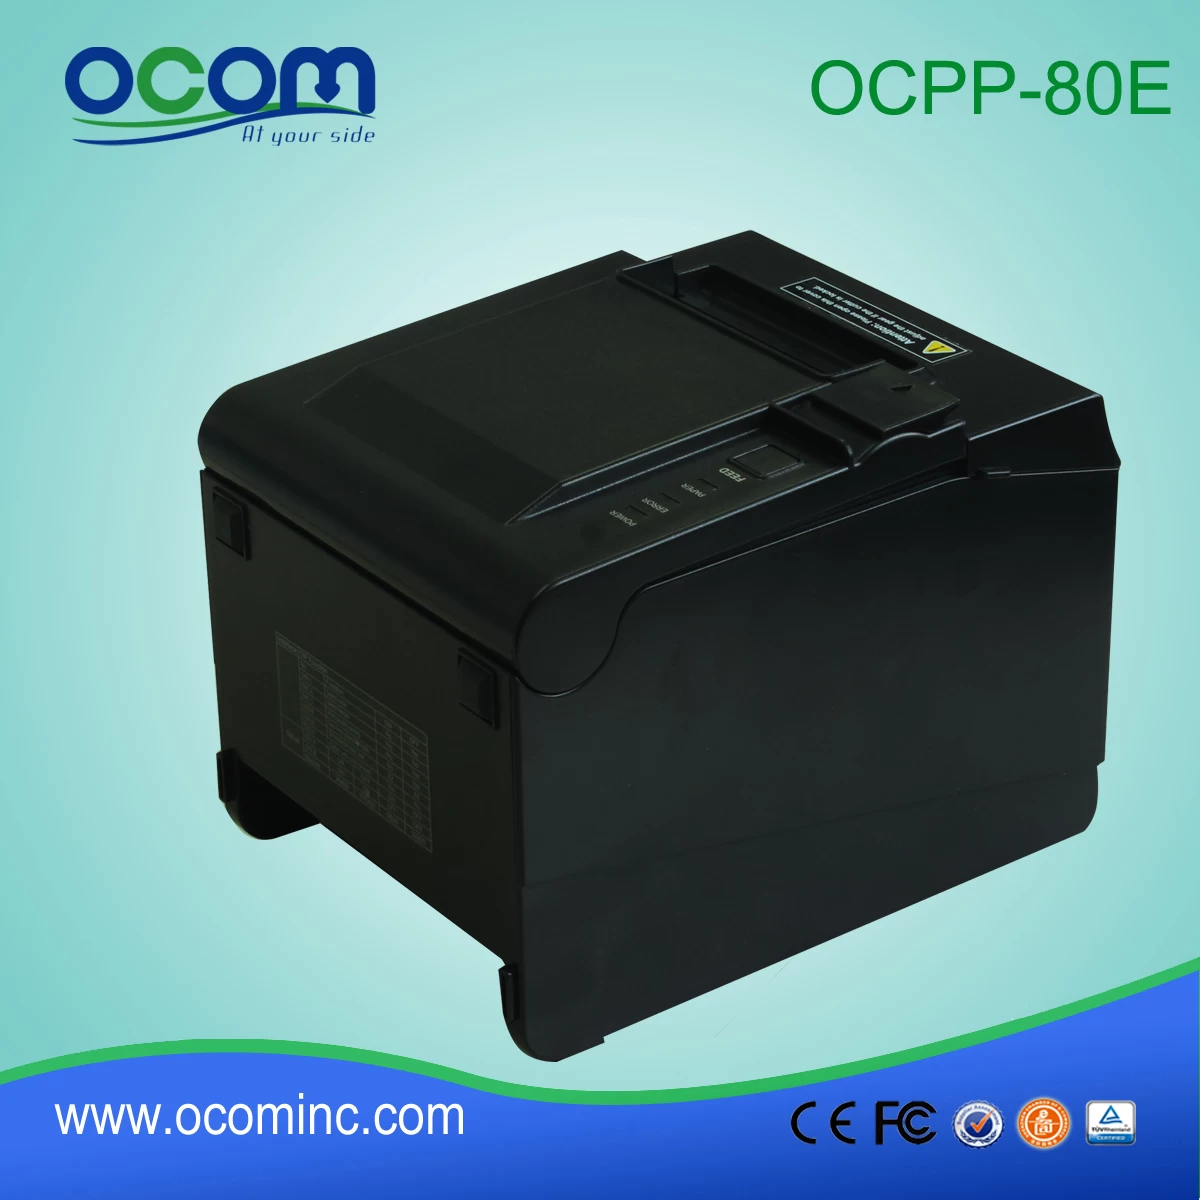 80mm POS thermal receipt printer support Android OCPP-80E